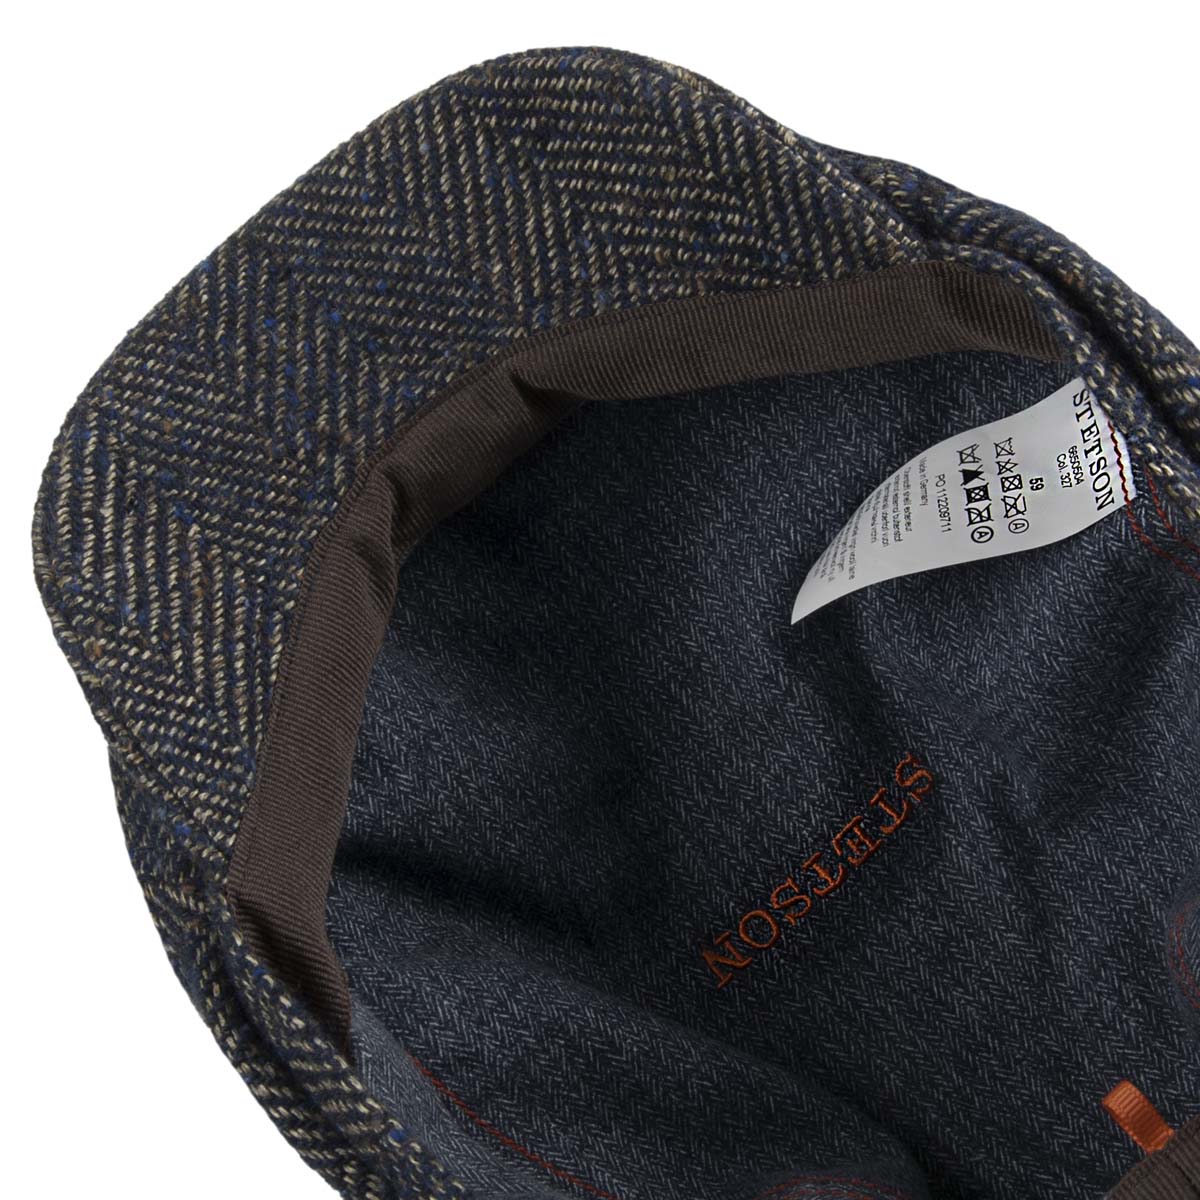 how to clean a wool flat cap